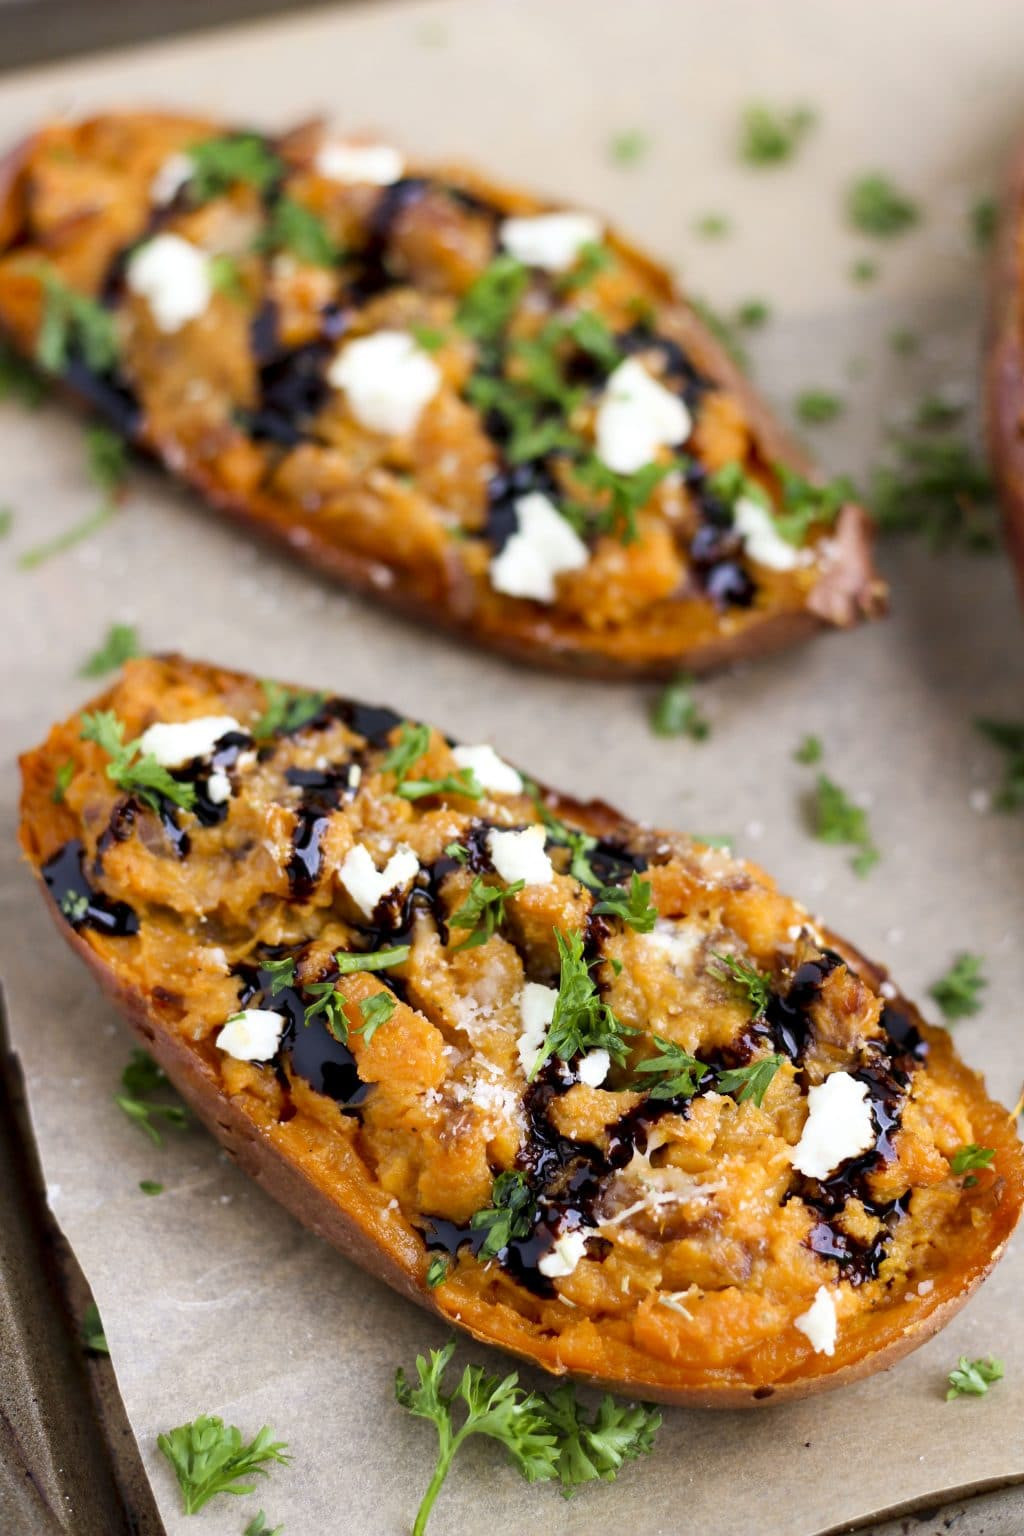 Baked Sweet Potato Recipes
 Twice Baked Sweet Potatoes with Balsamic ions